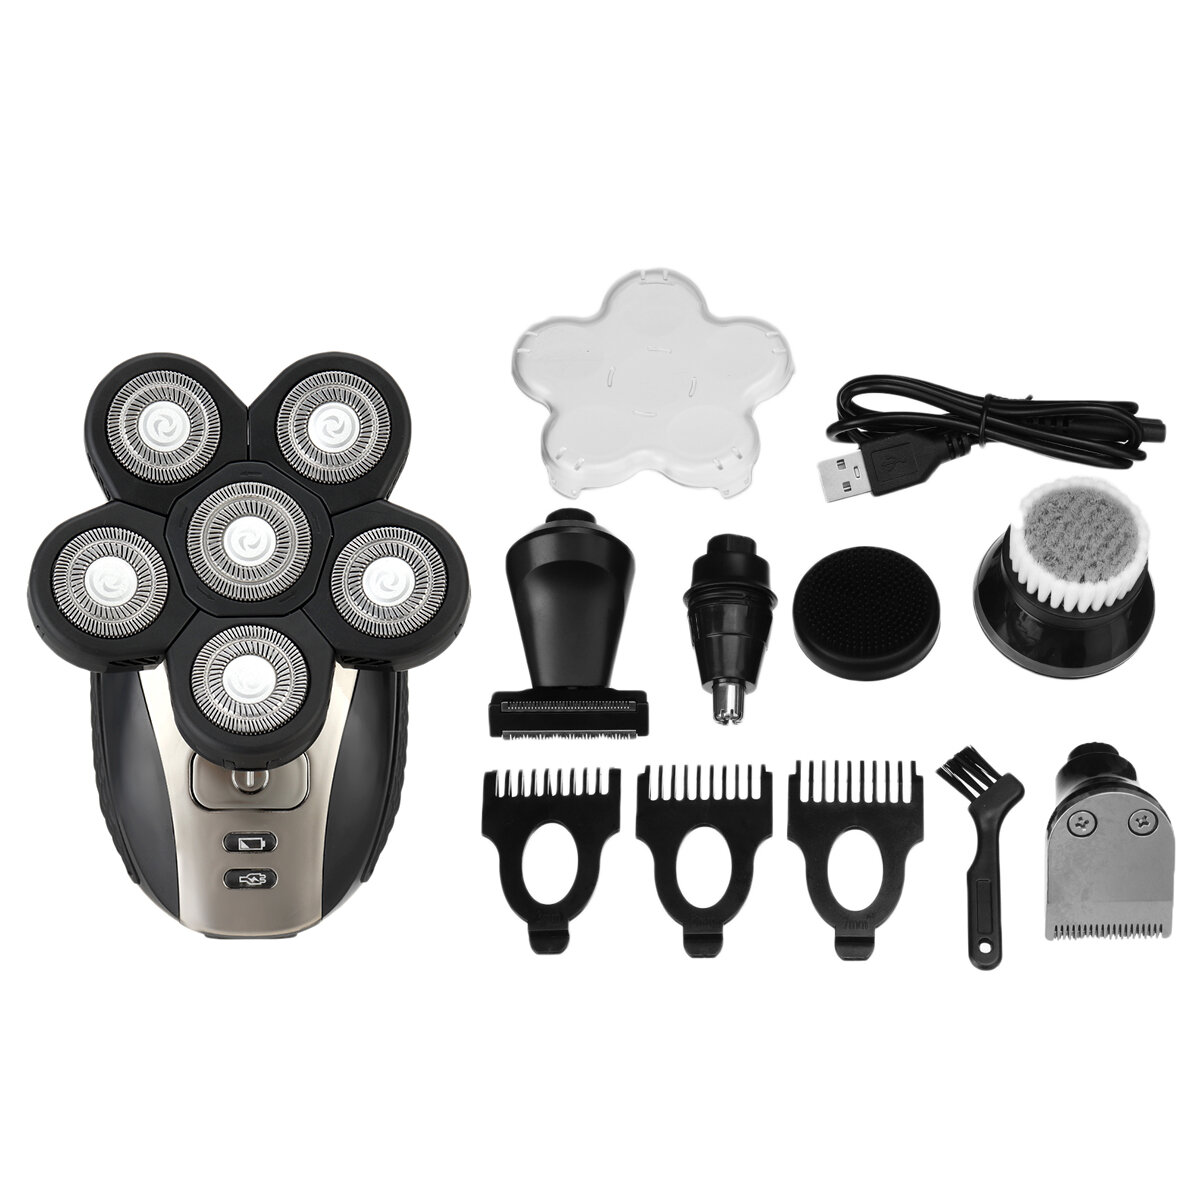 

5 IN 1 4D Rotary Electric Shaver USB Rechargeable Bald Head Shaver Beard Trimmer